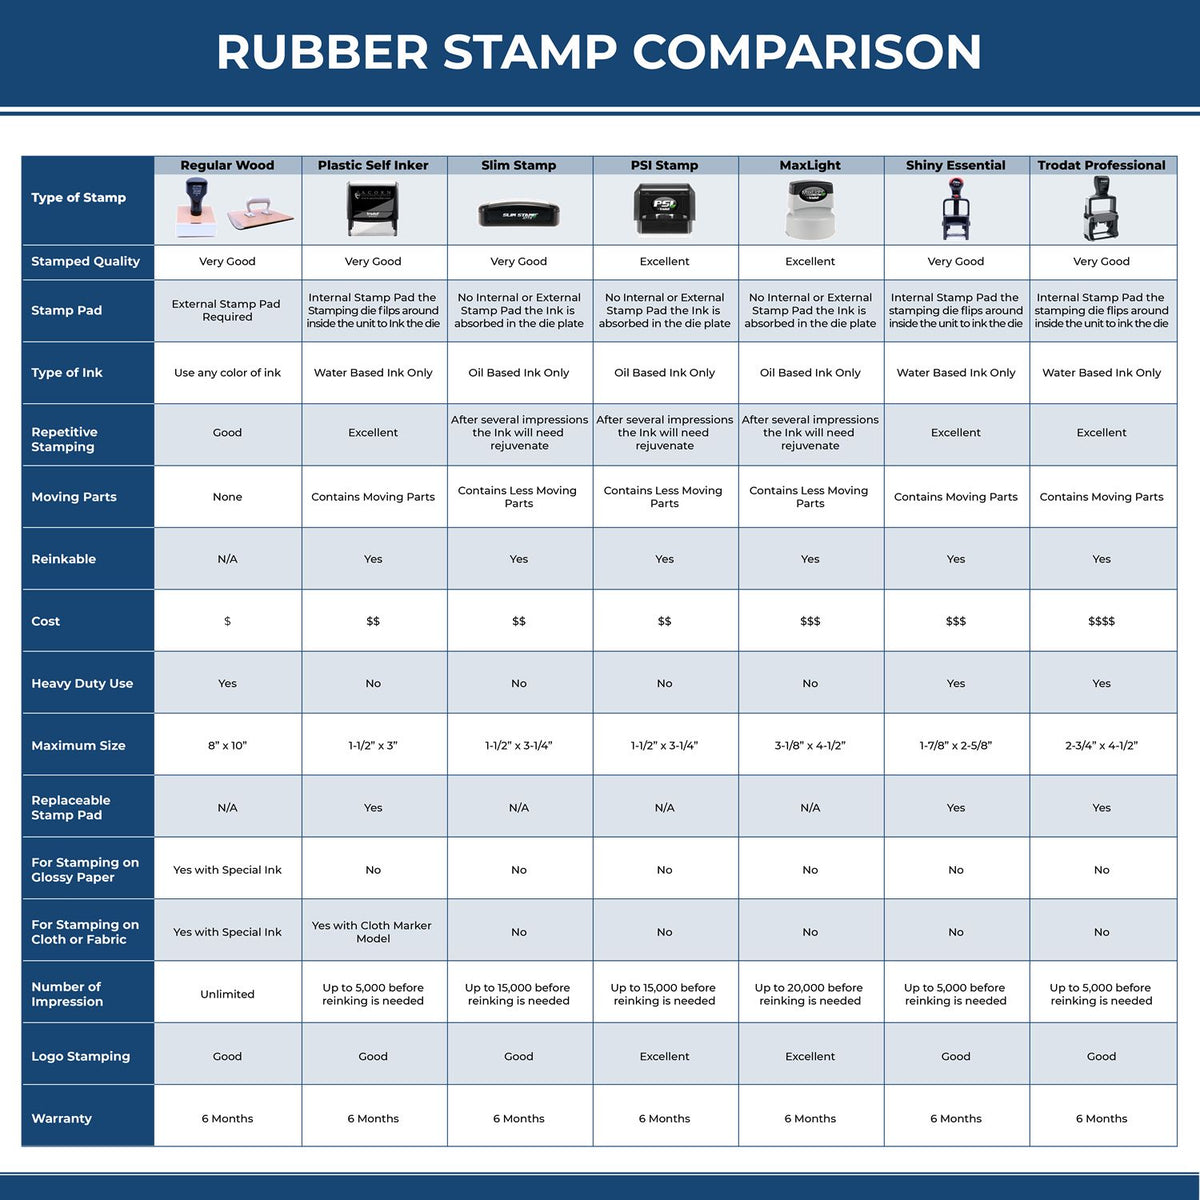 Copy Outline Text Rubber Stamp 4015R Rubber Stamp Comparison